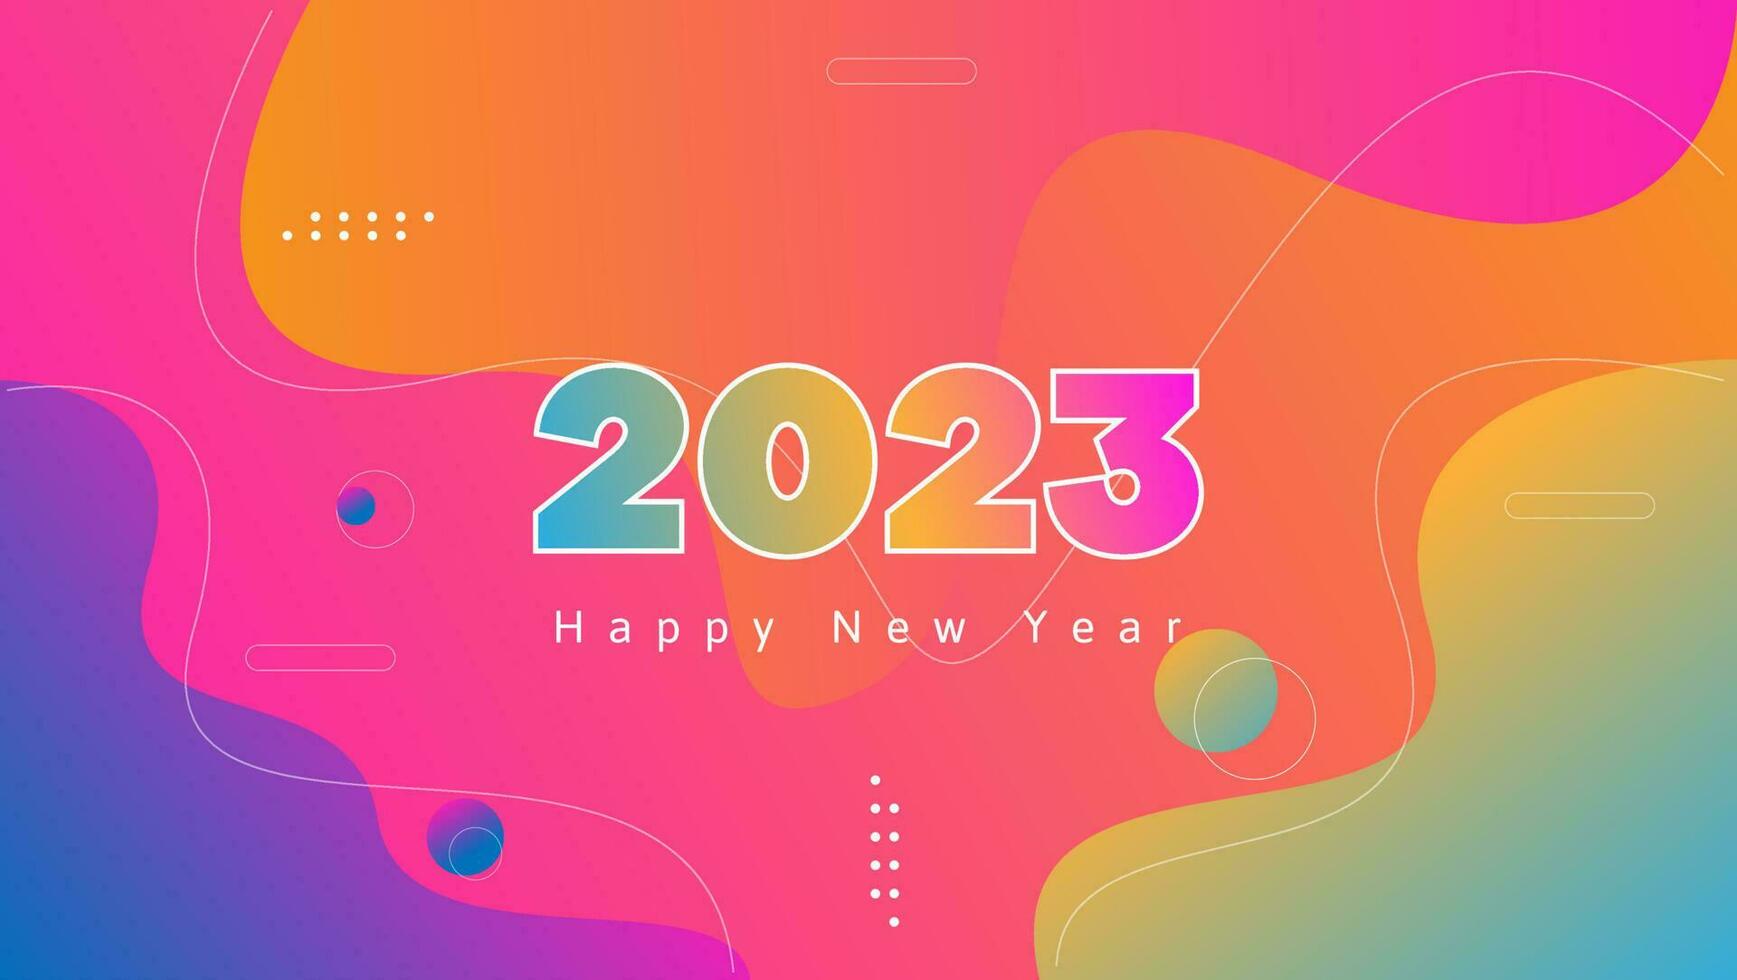 colorful happy new year 2023 background with gradient abstract shapes and lines. vector illustration